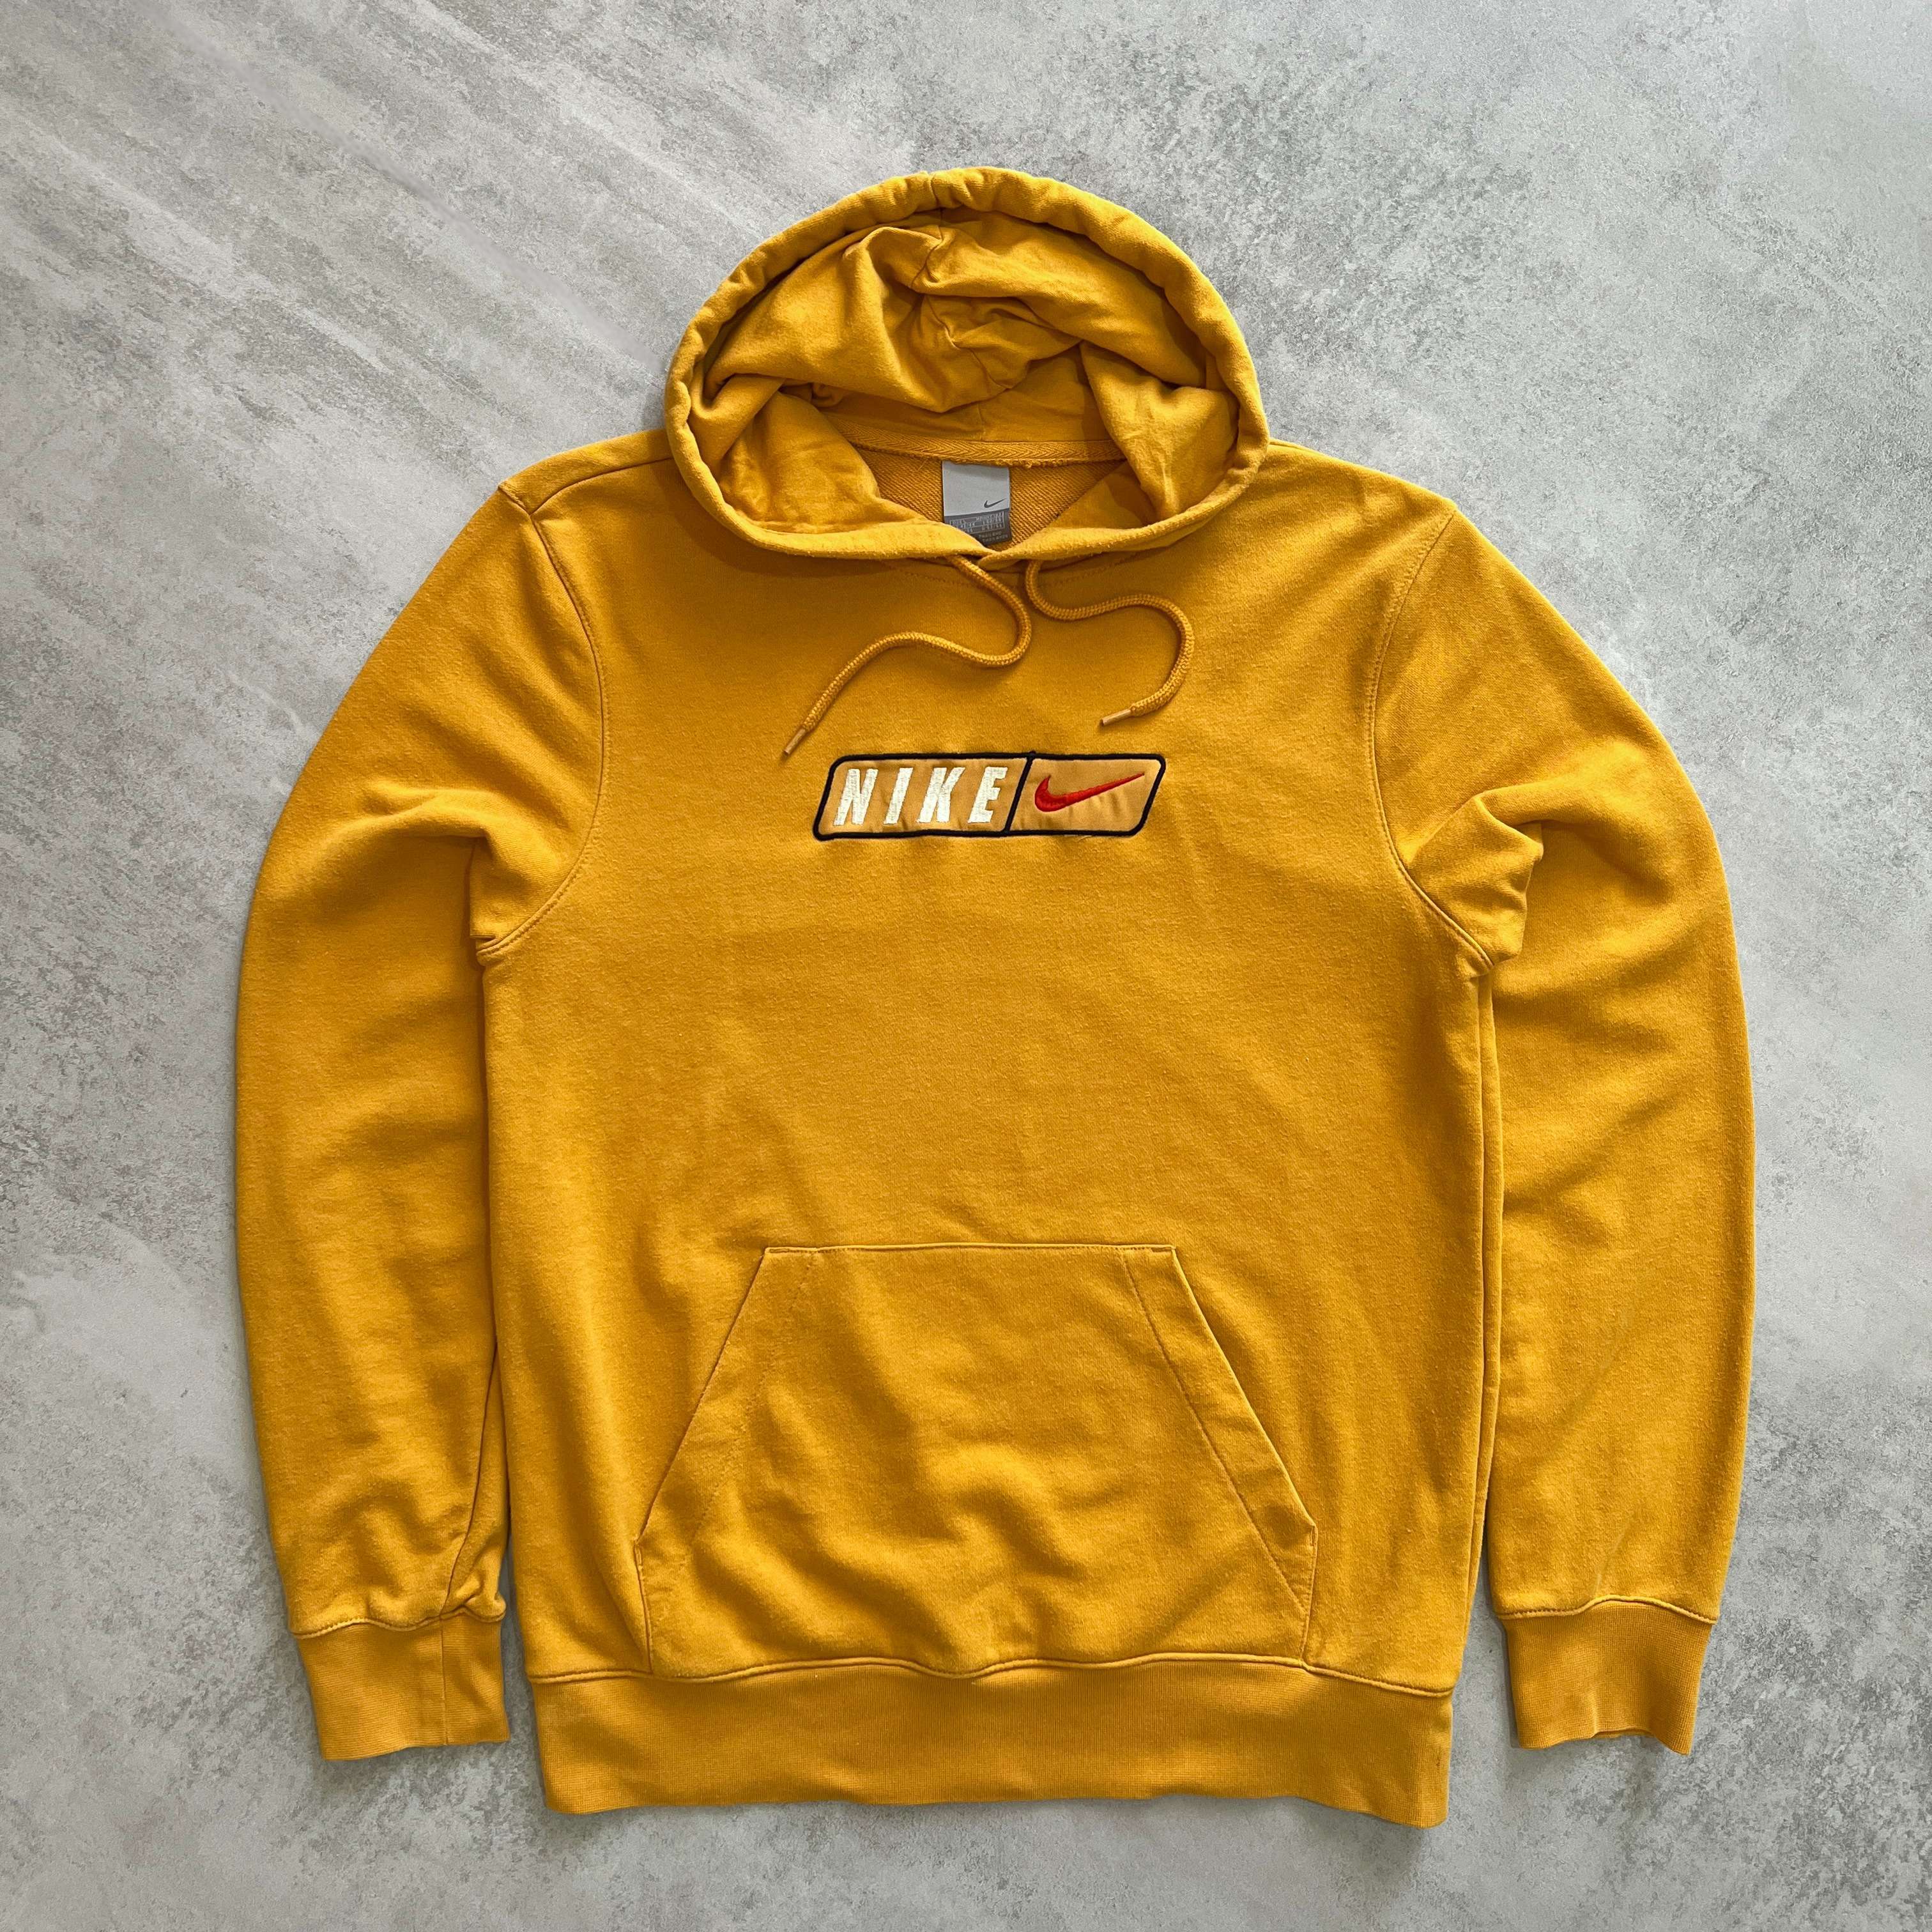 Nike 1990s heavyweight embroidered hoodie (M)